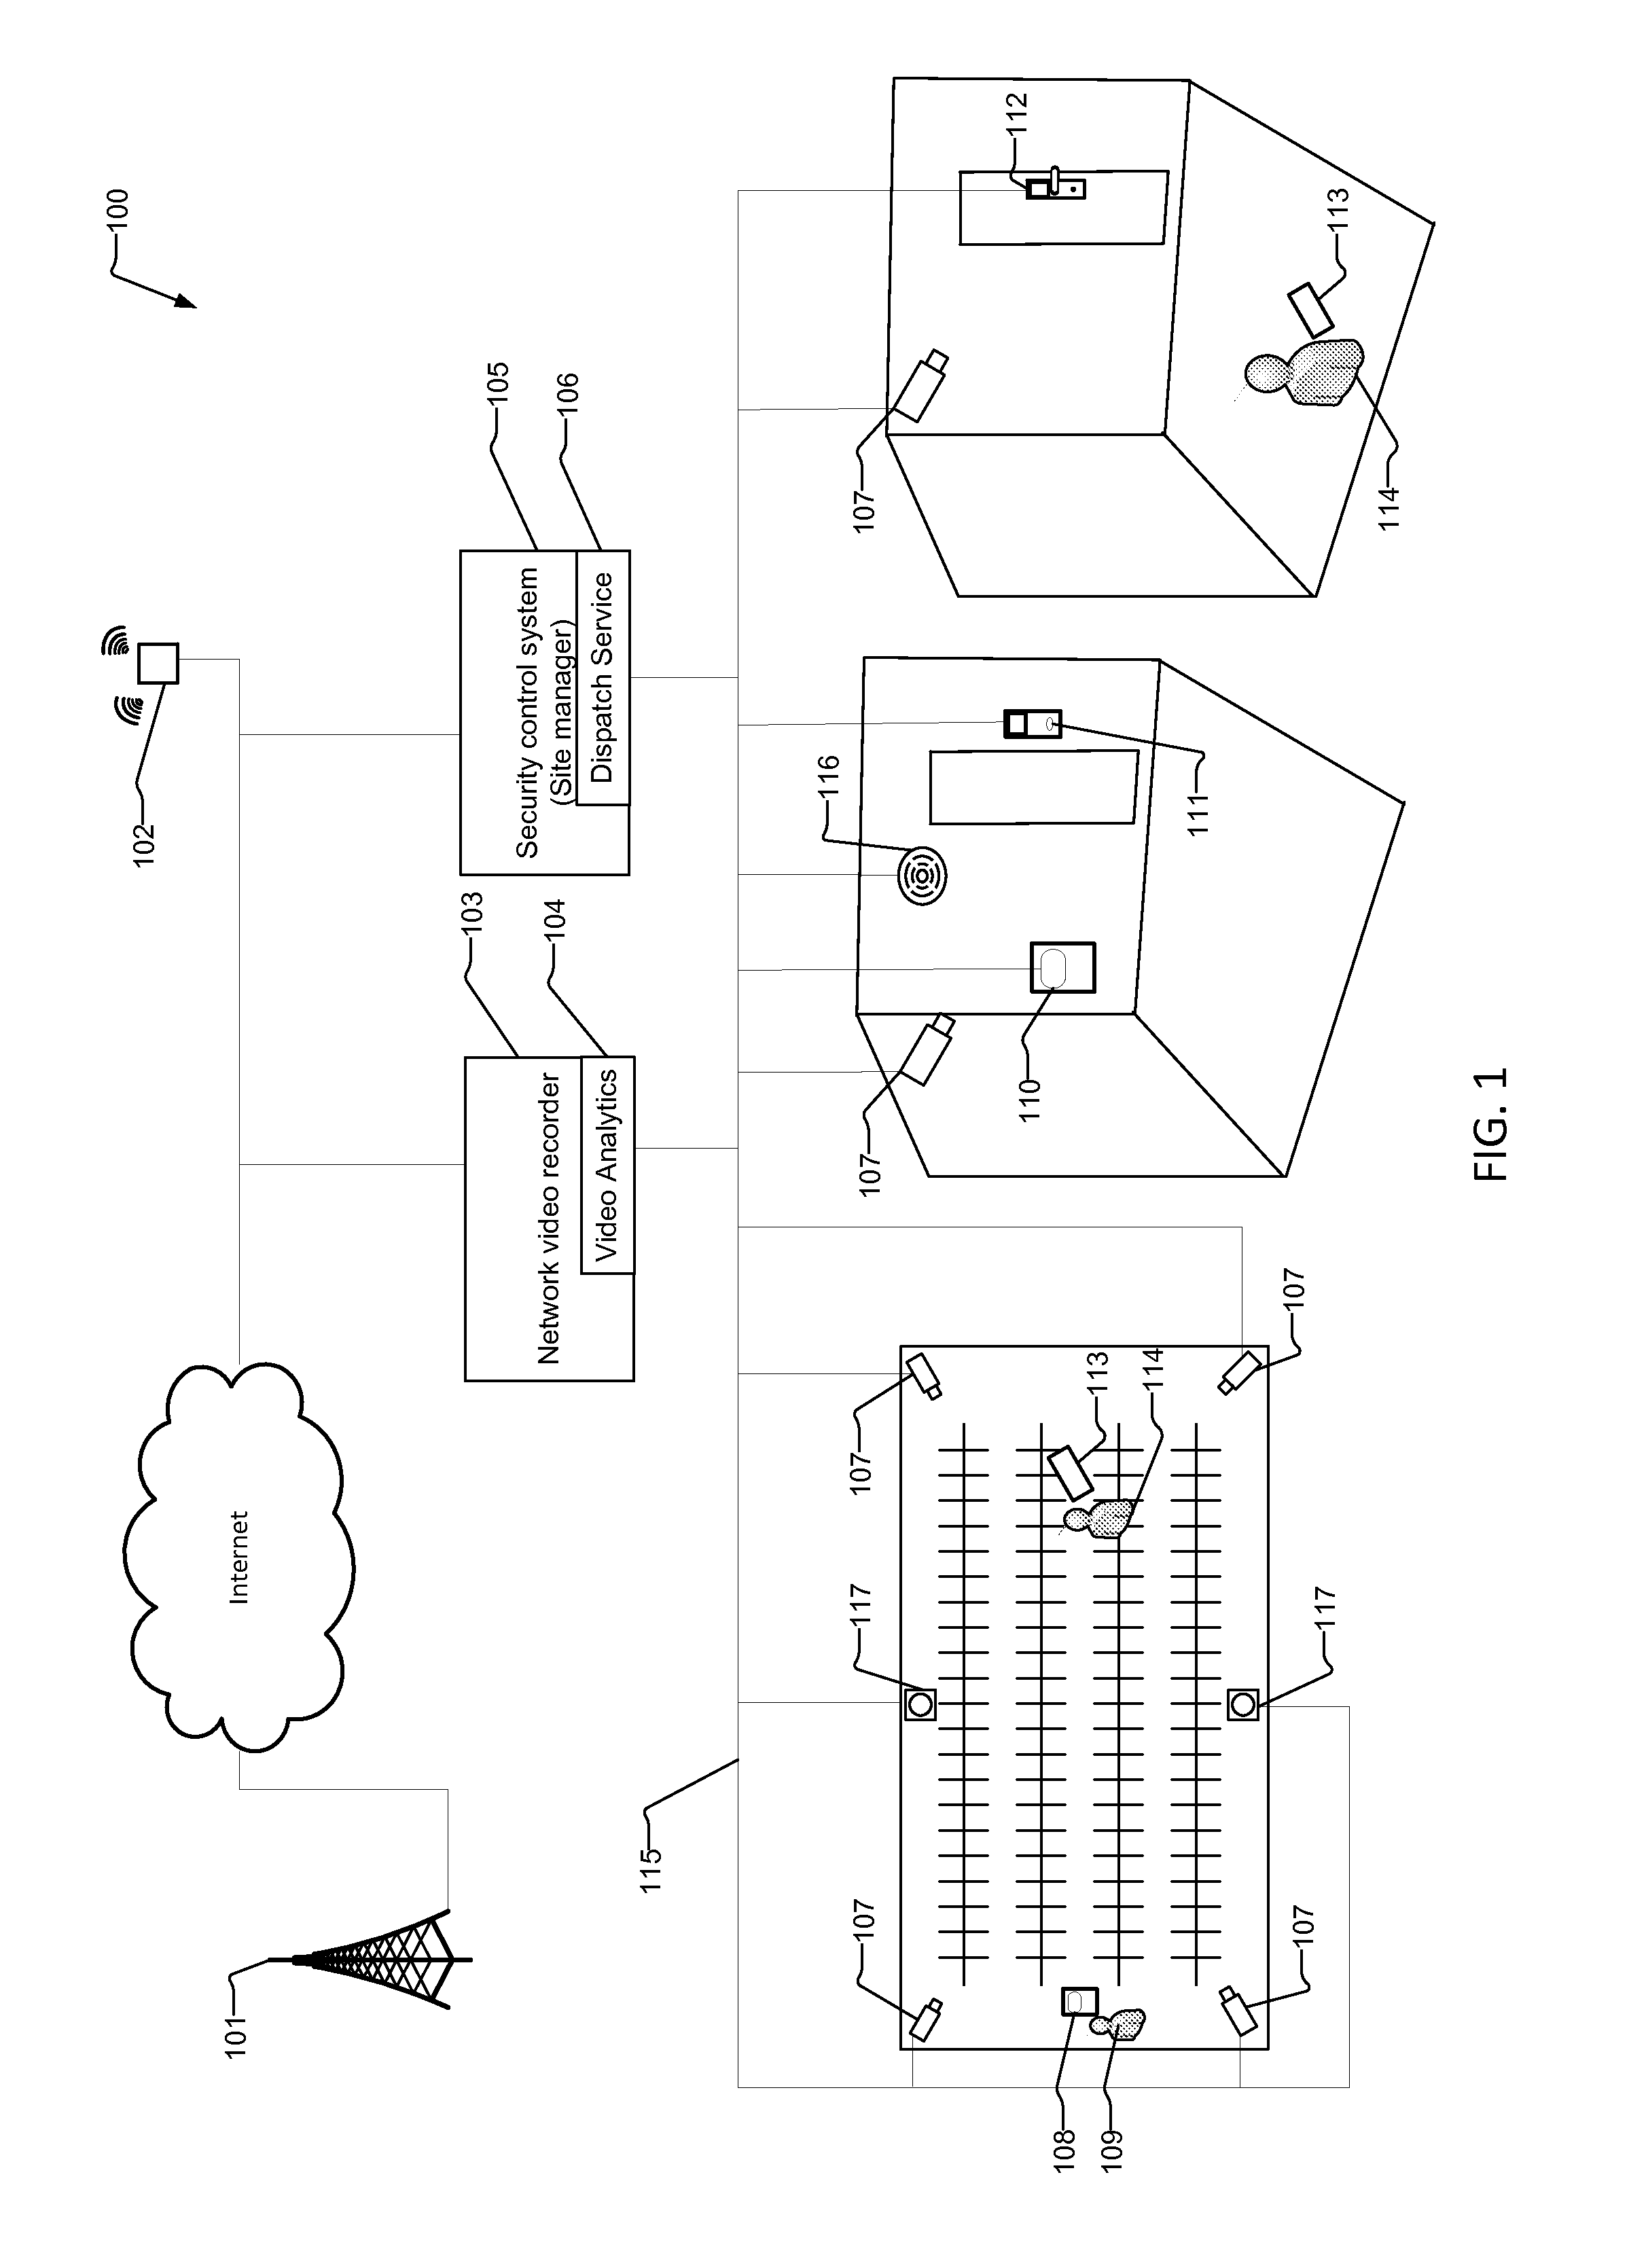 System and Method for Video/Audio and Event Dispatch Using Positioning System